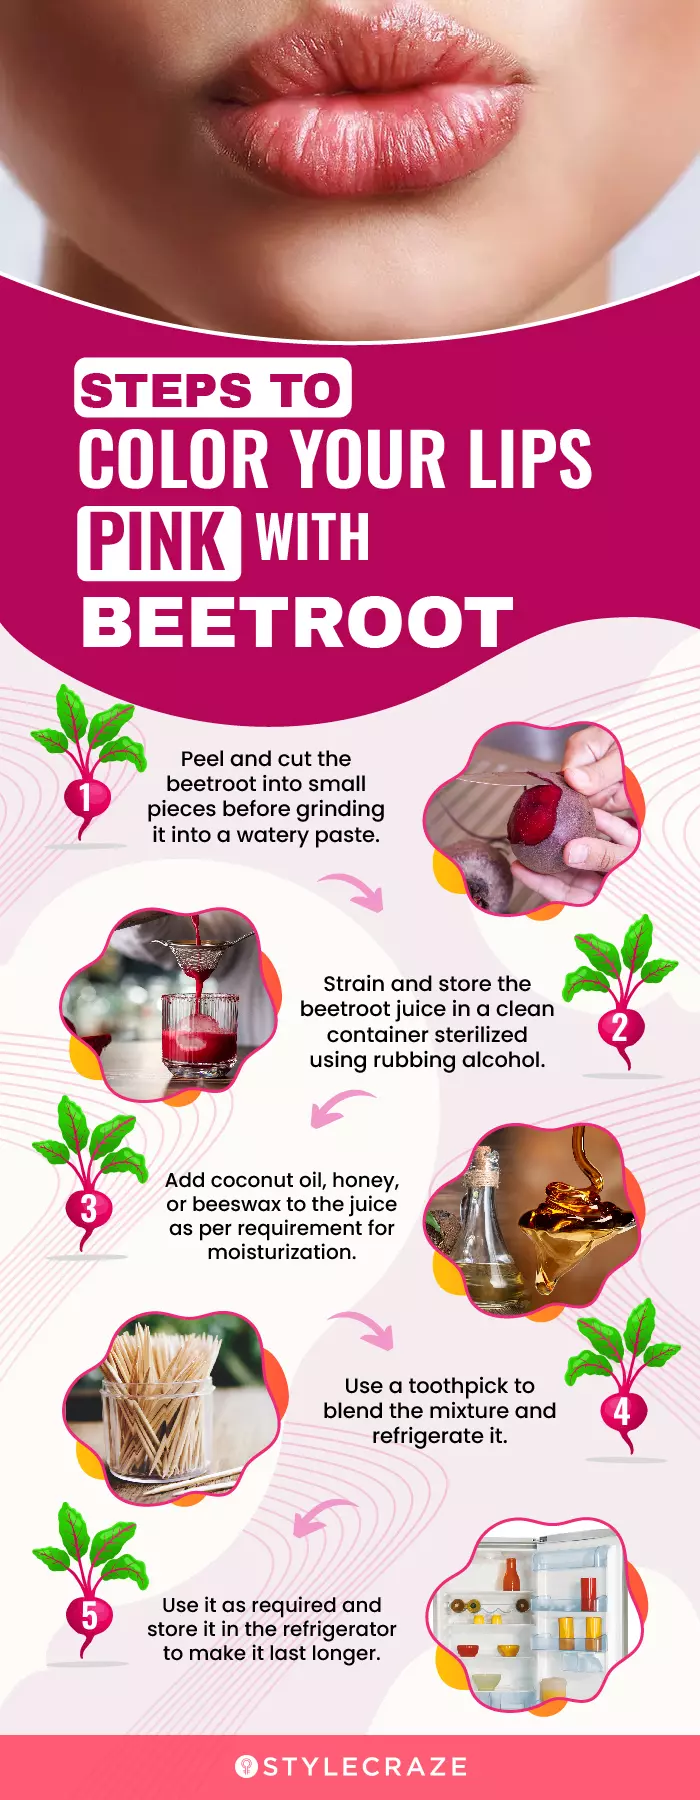 steps to color your lips pink with beetroot (infographic)